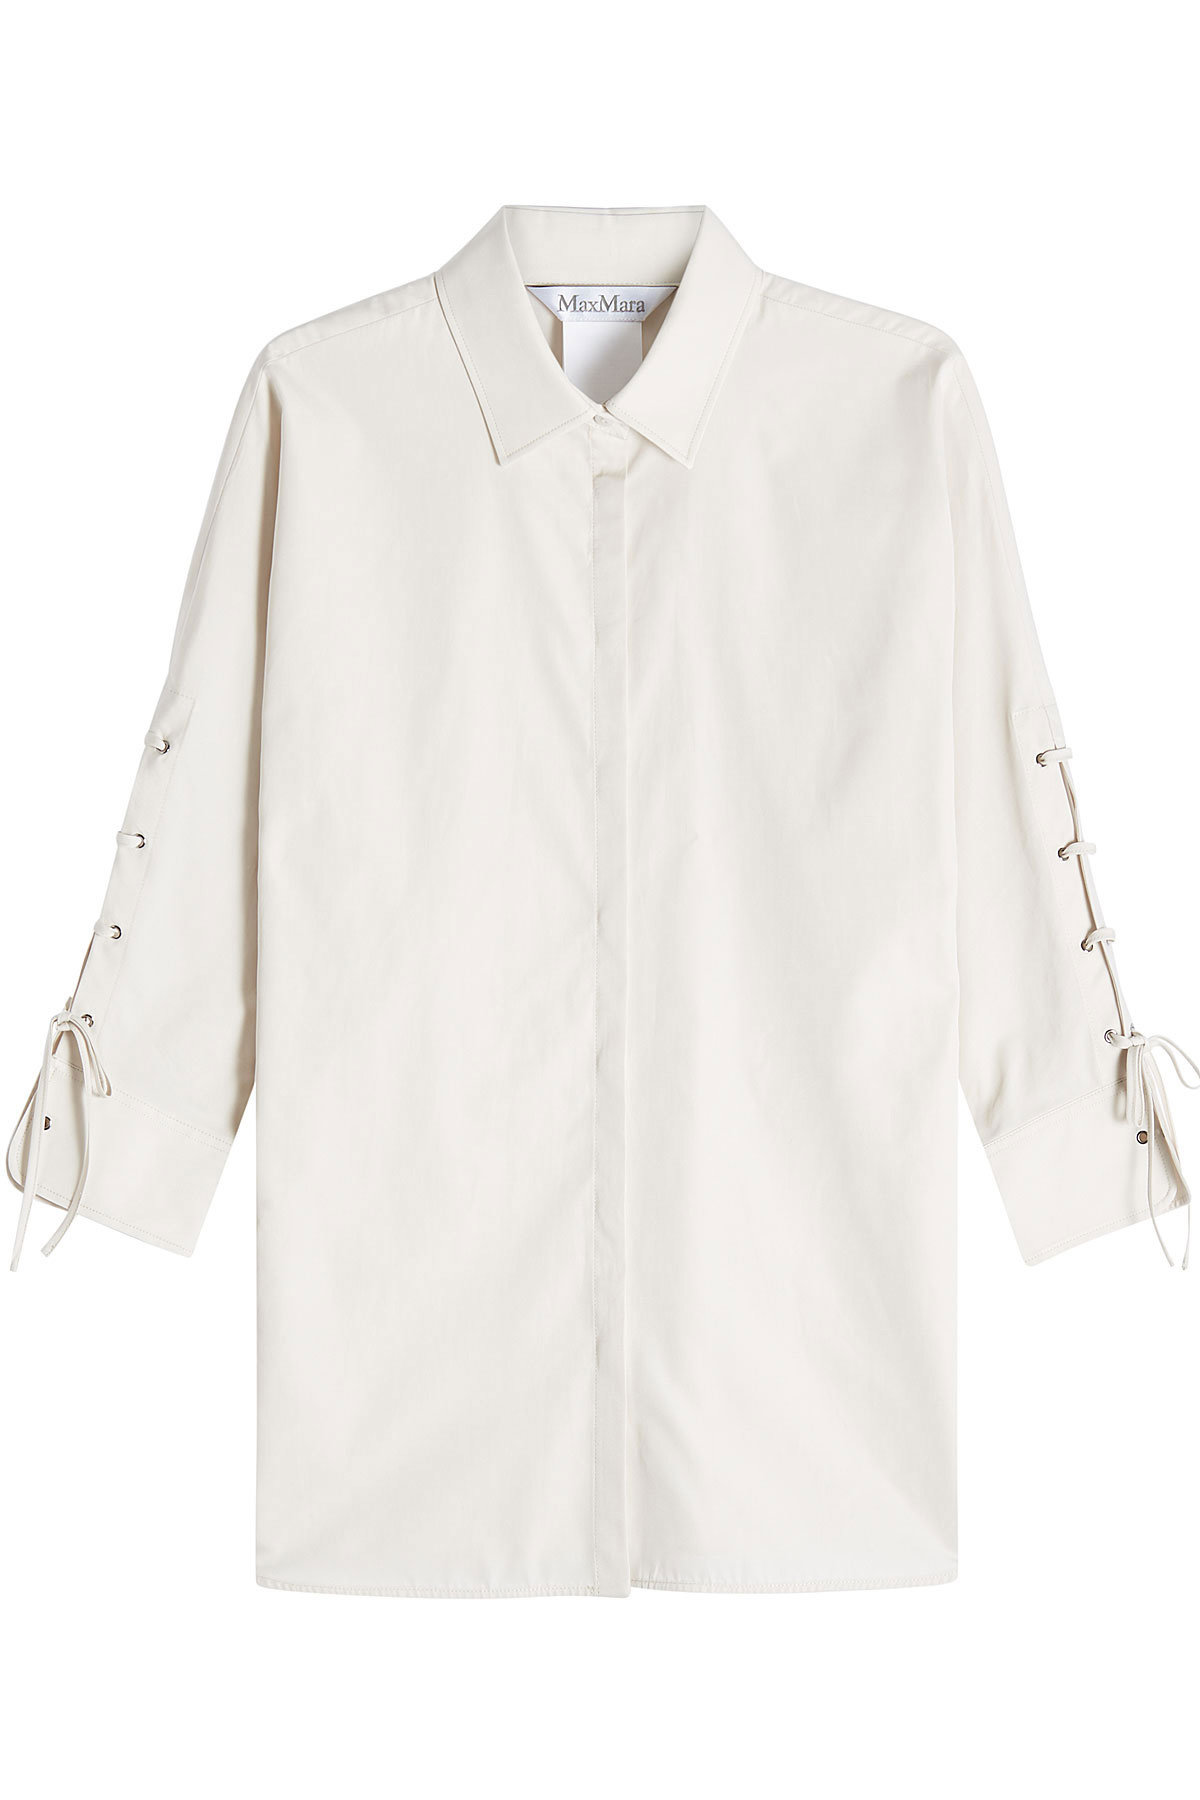 Max Mara - Cotton Shirt with Lace-Up Detail